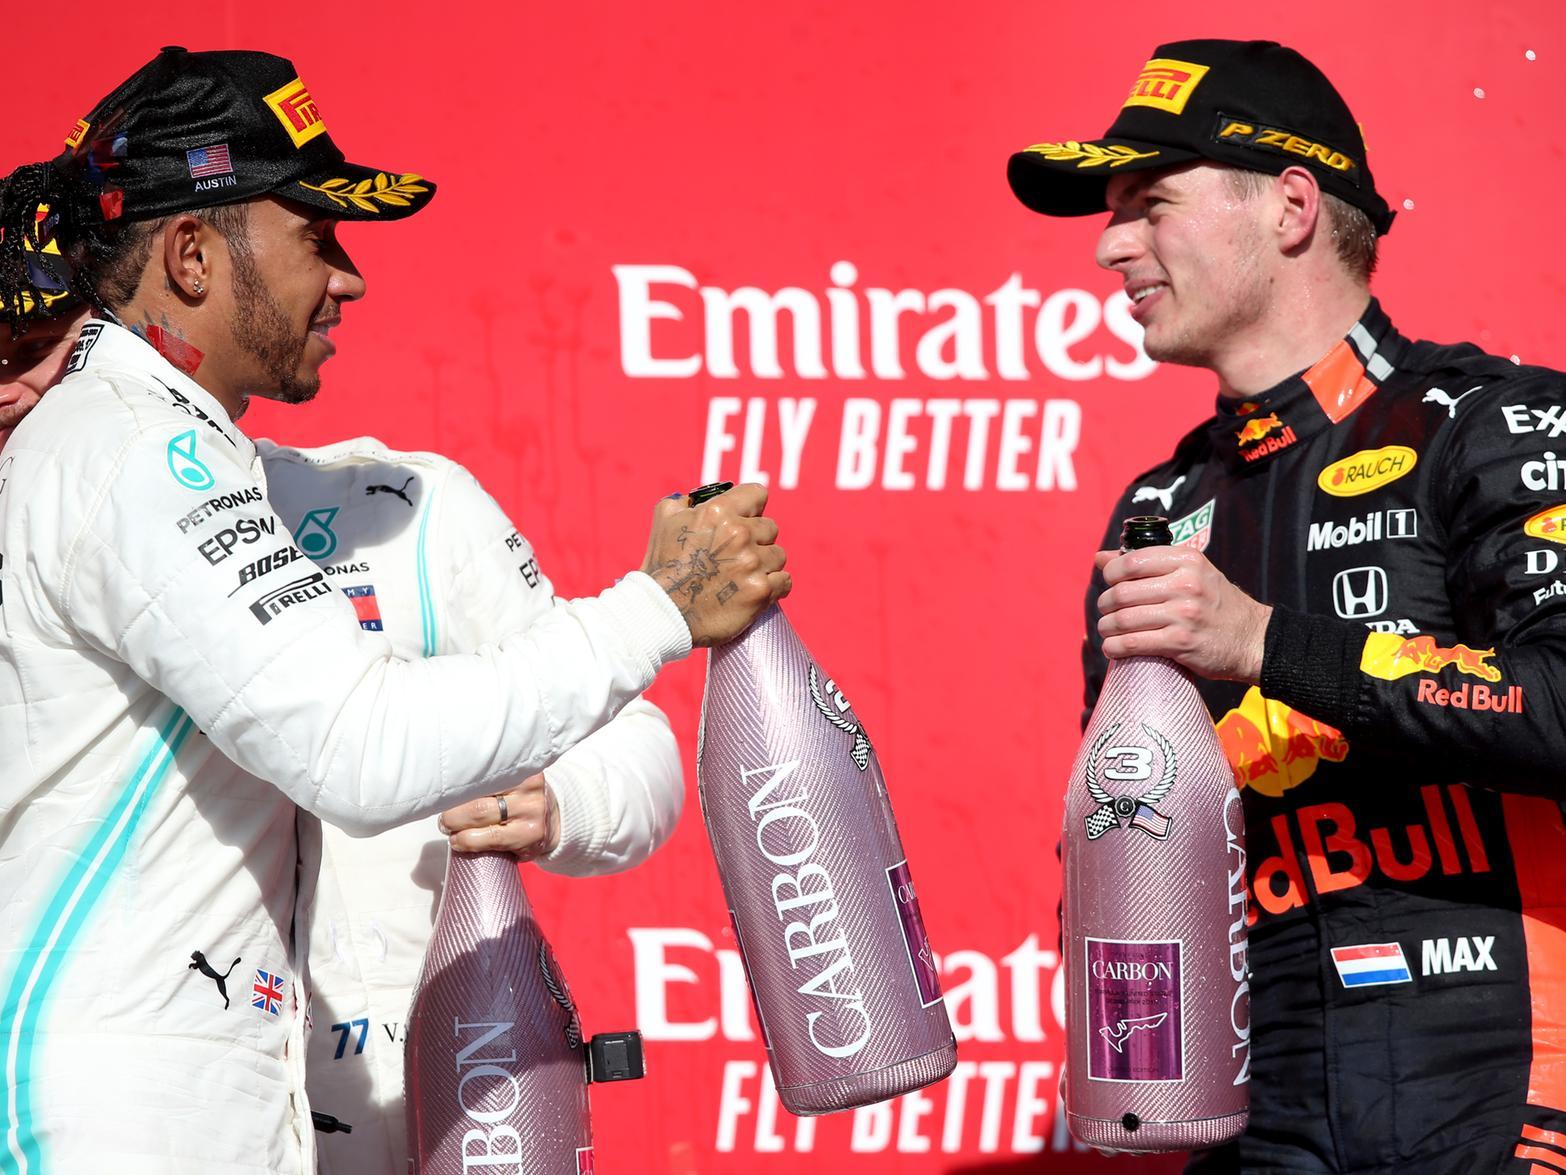 Verstappen claims third place in his 100th Grand Prix, but it could have been second had he not been held up by yellow flags as he hunted down new champion Lewis Hamilton.